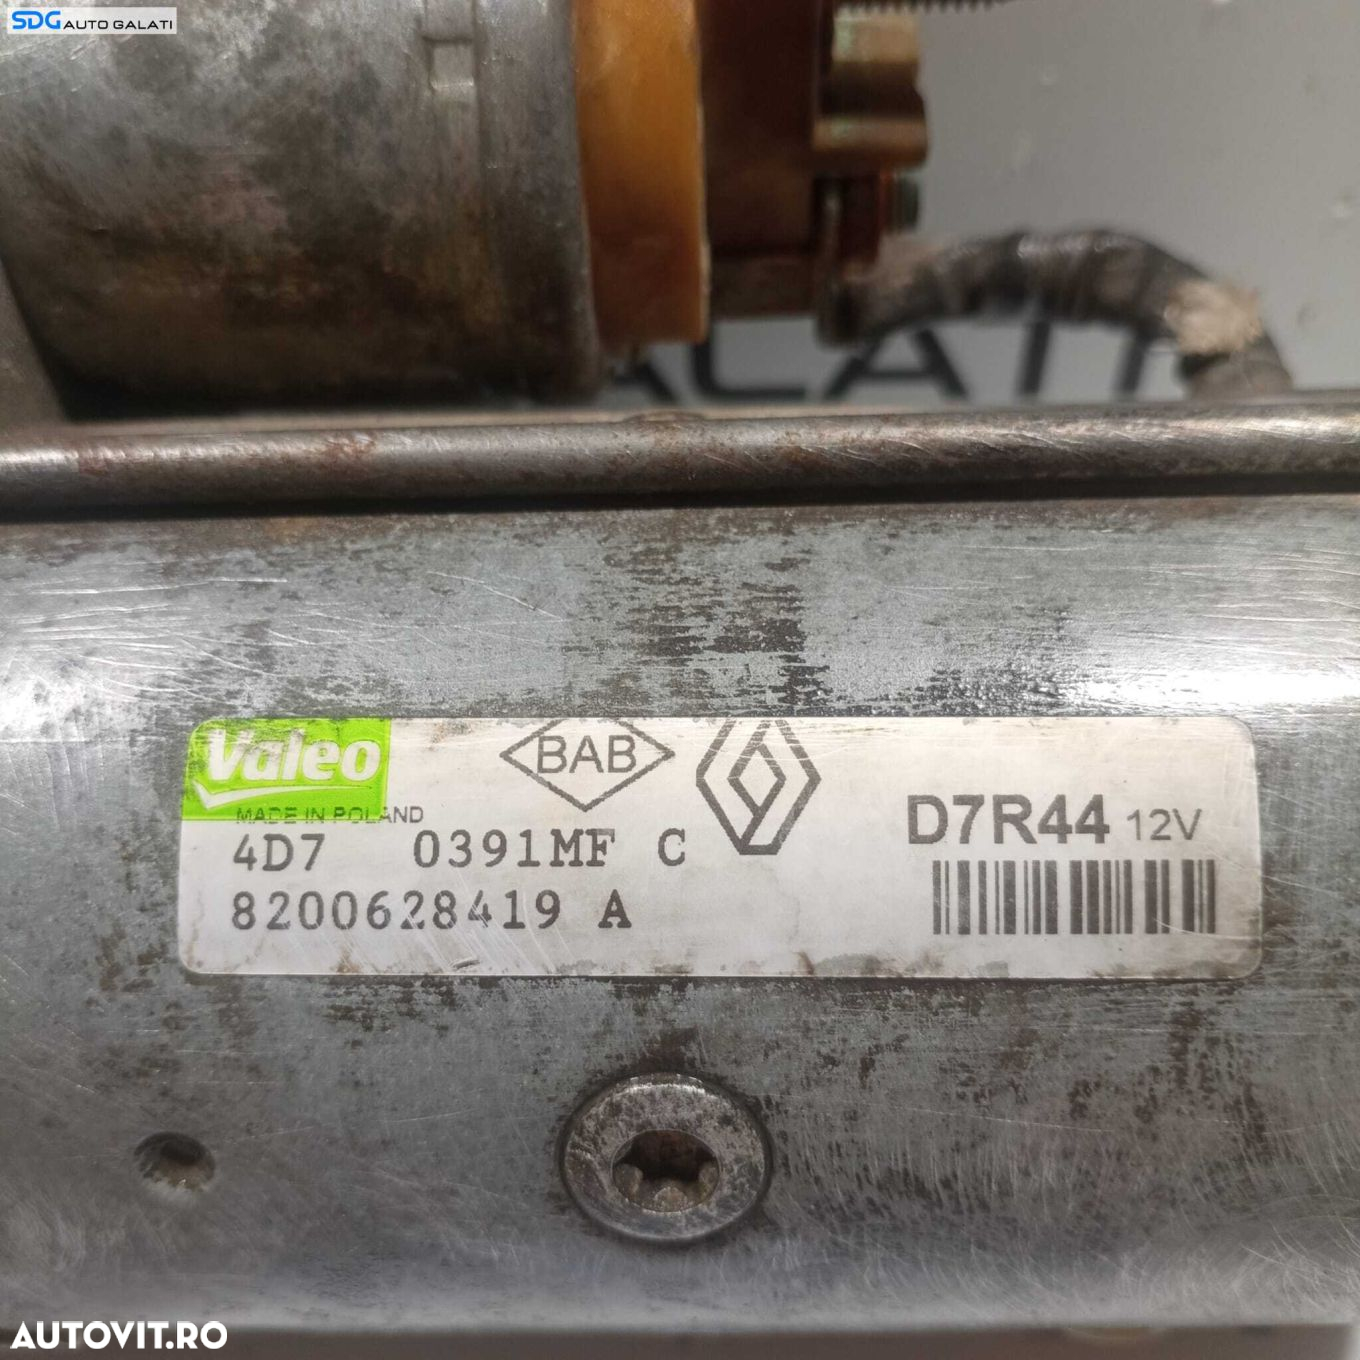 Electromotor Renault Scenic 2 1.9 DCI 2003 - 2009 Cod 8200628419A [1566] - 4